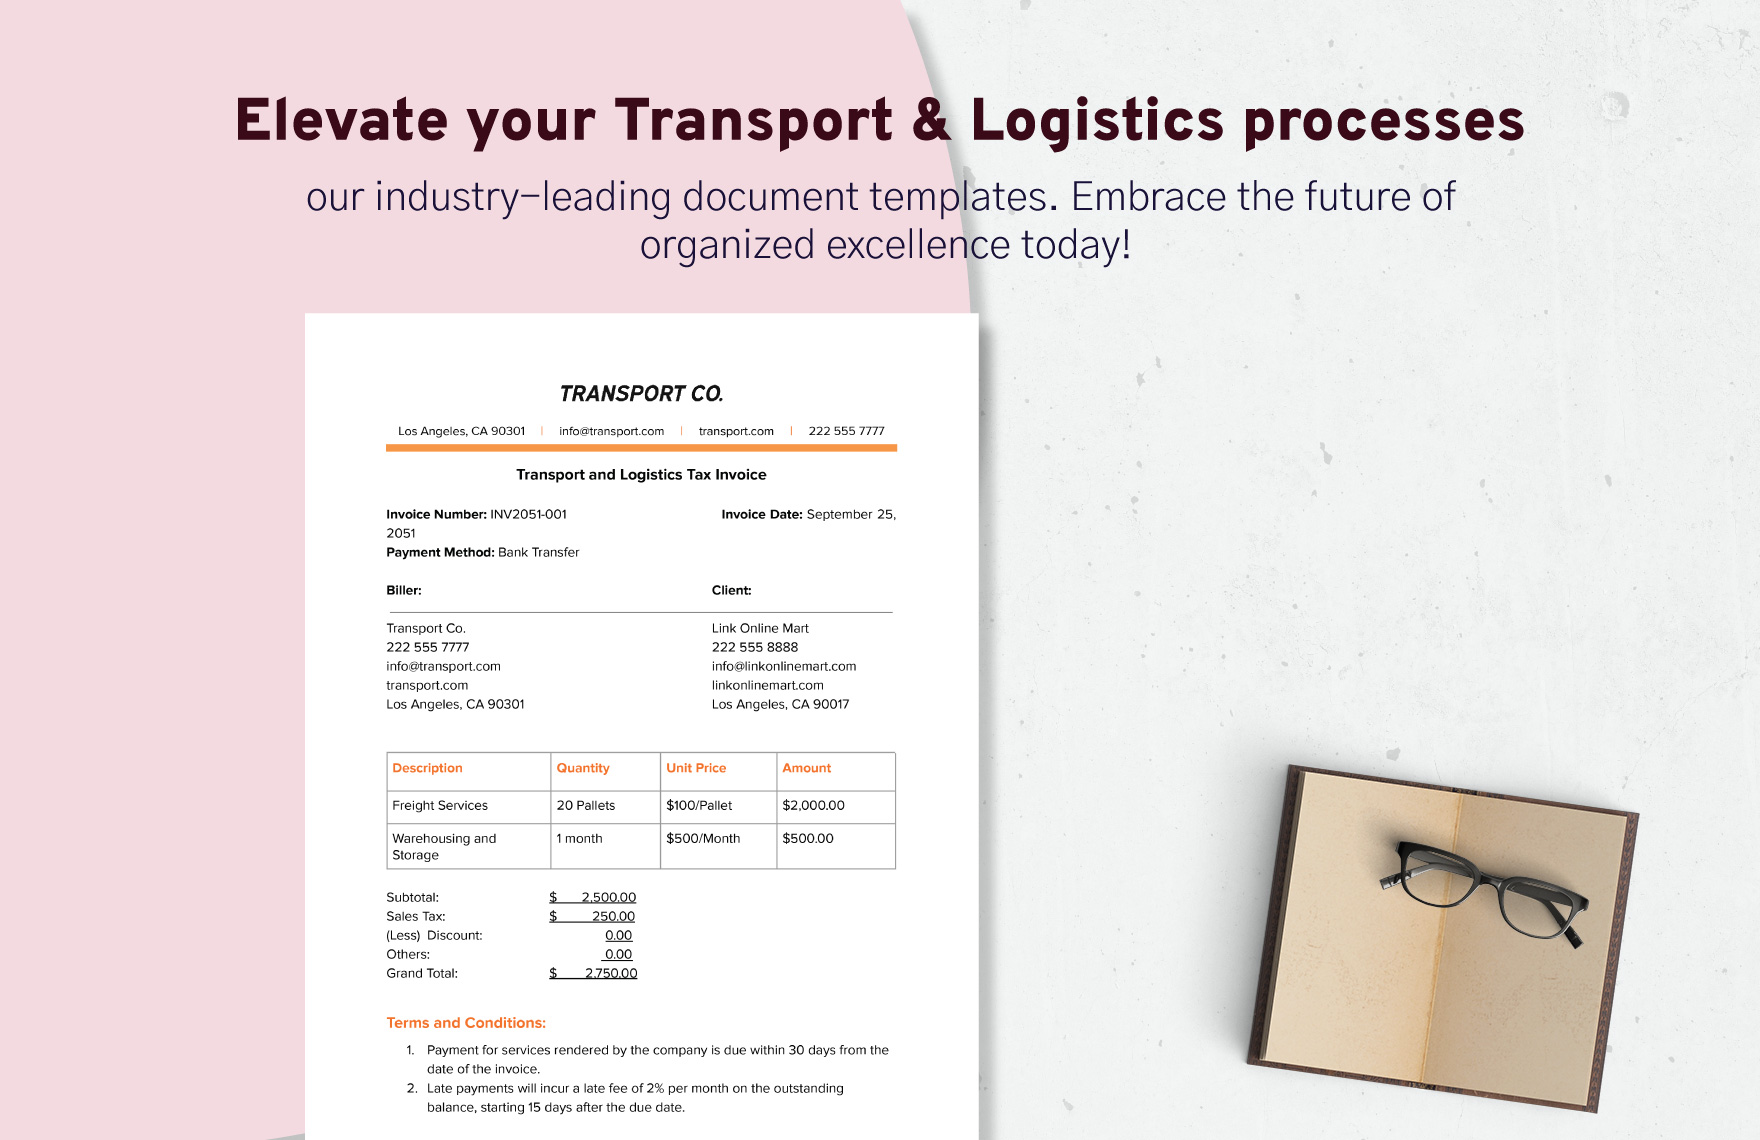 Transport and Logistics Tax Invoice Template